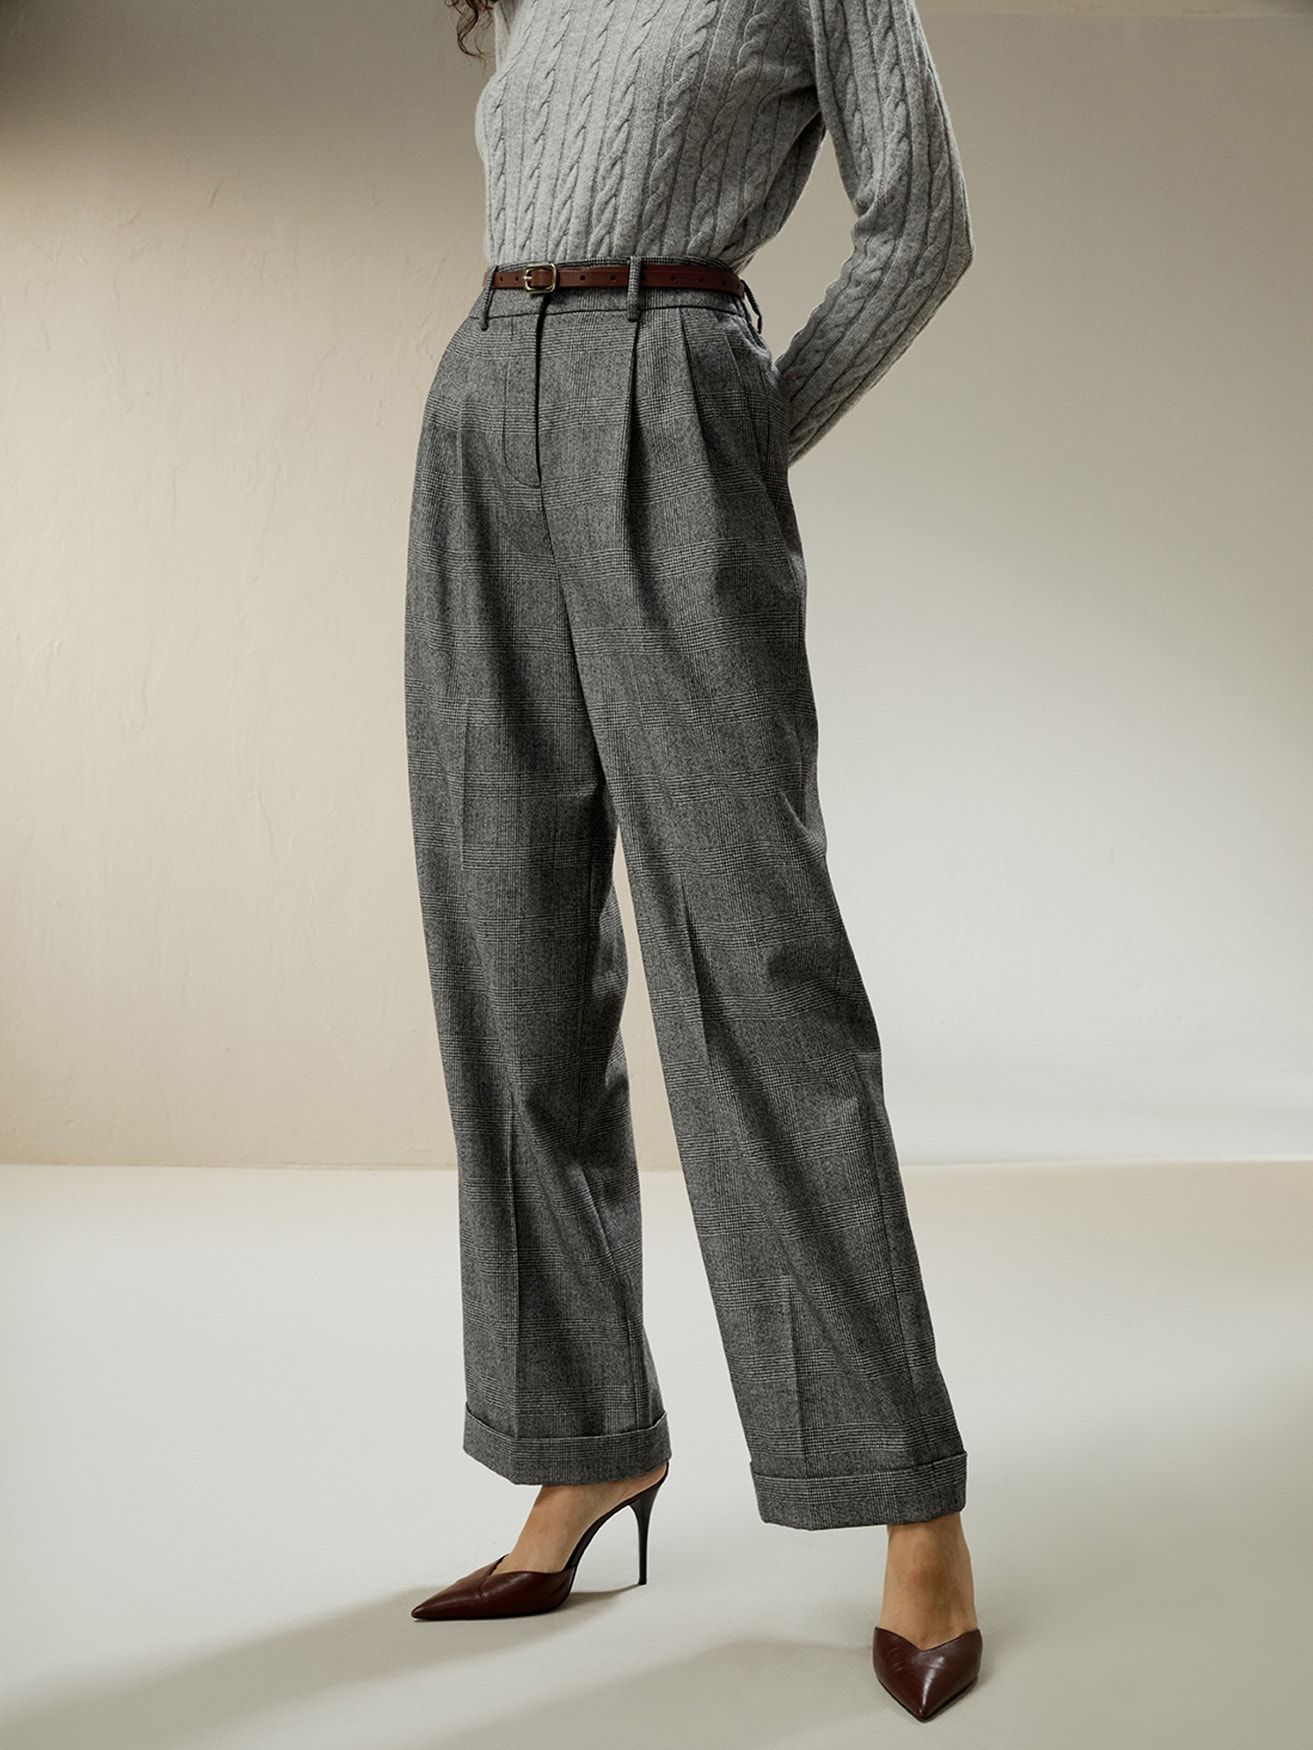 Go for the stylish formal ladies trouser suits